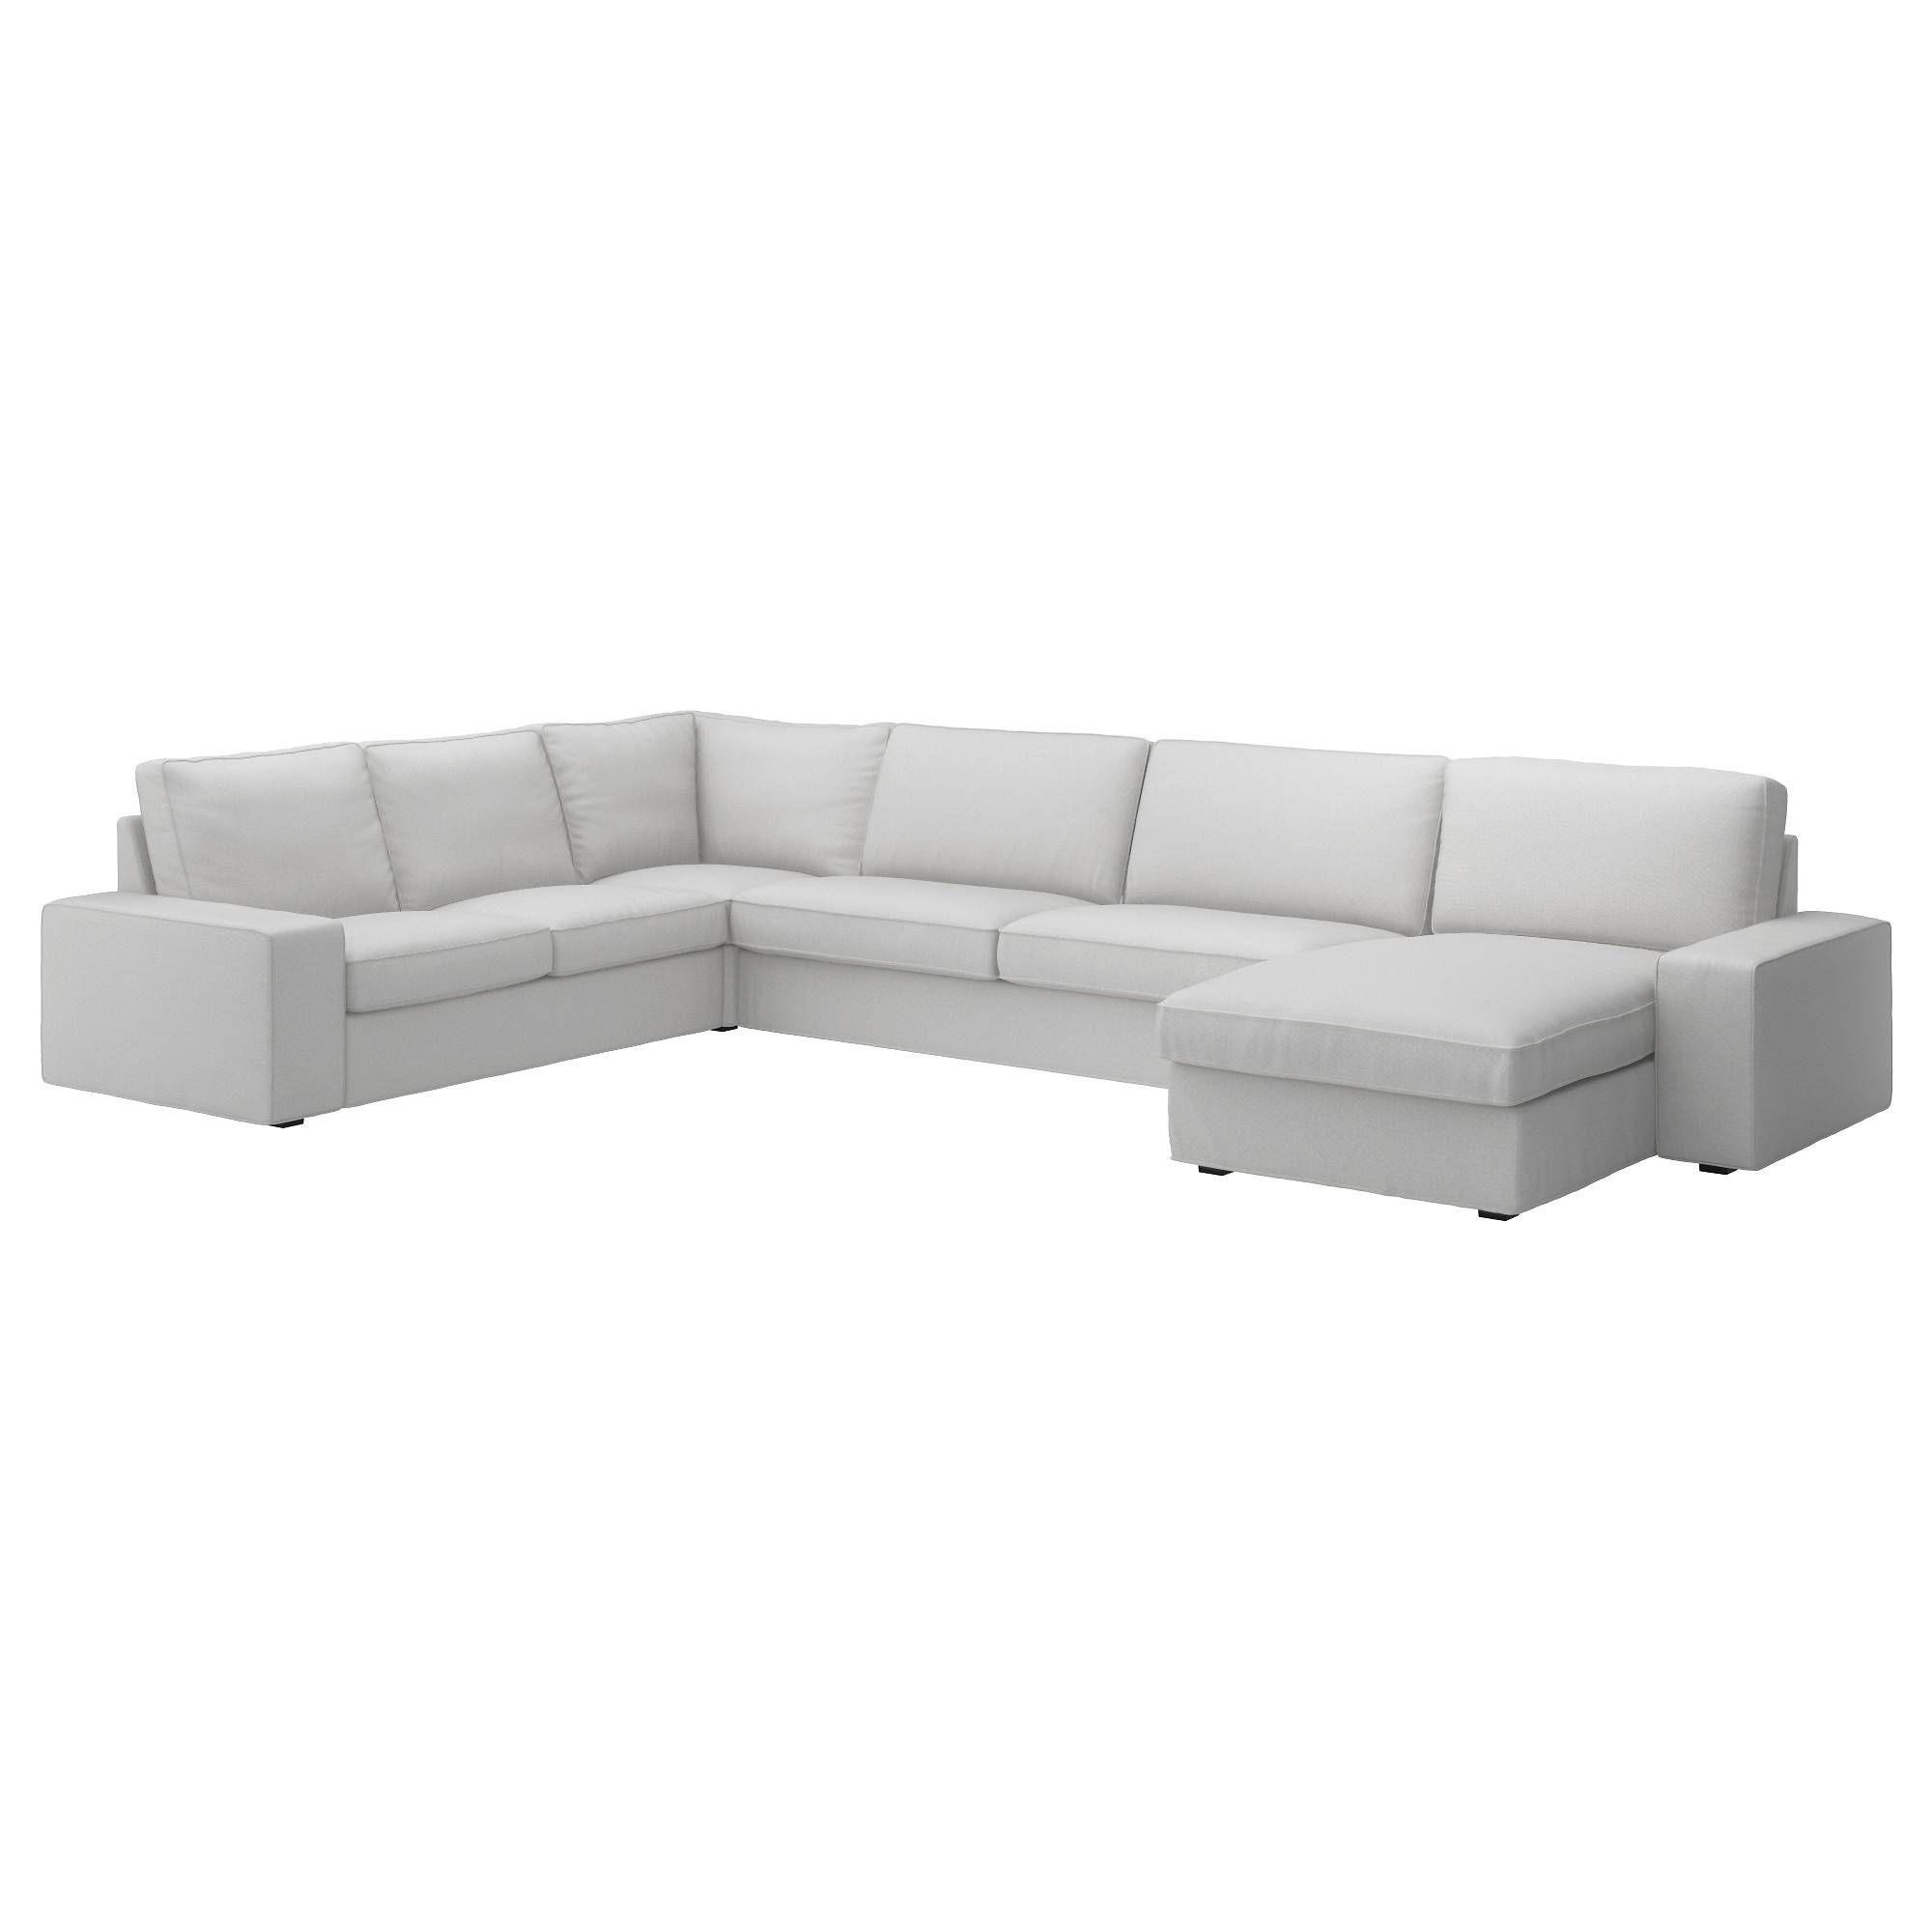 Furniture: Comfortable Deep Seat Sectional For Your Living Room Within 2 Seat Sectional Sofas (View 20 of 30)